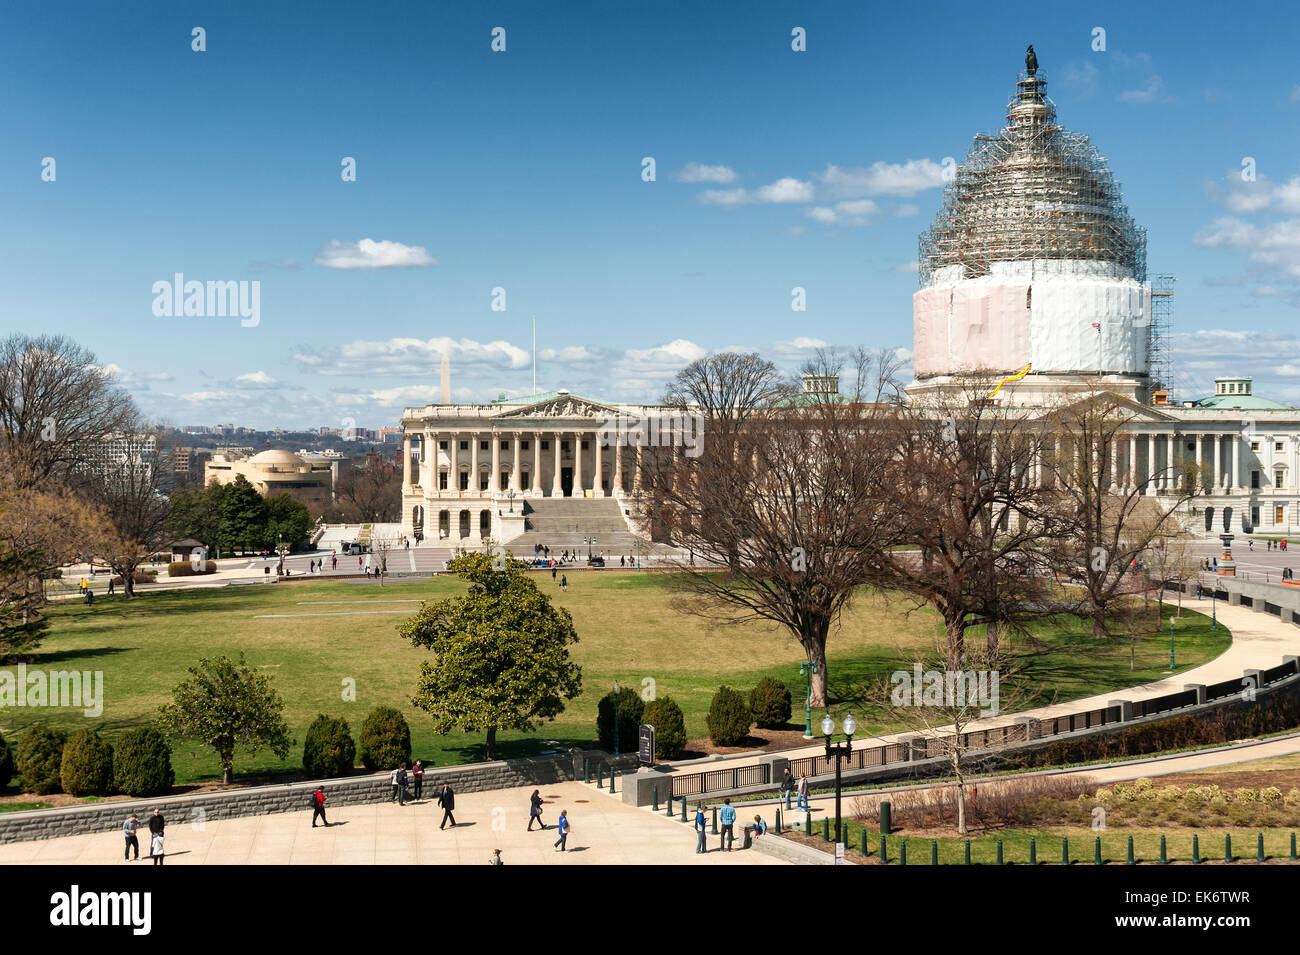 United States Capitol Building on reconstruction in Washington D.C, Stock Photo